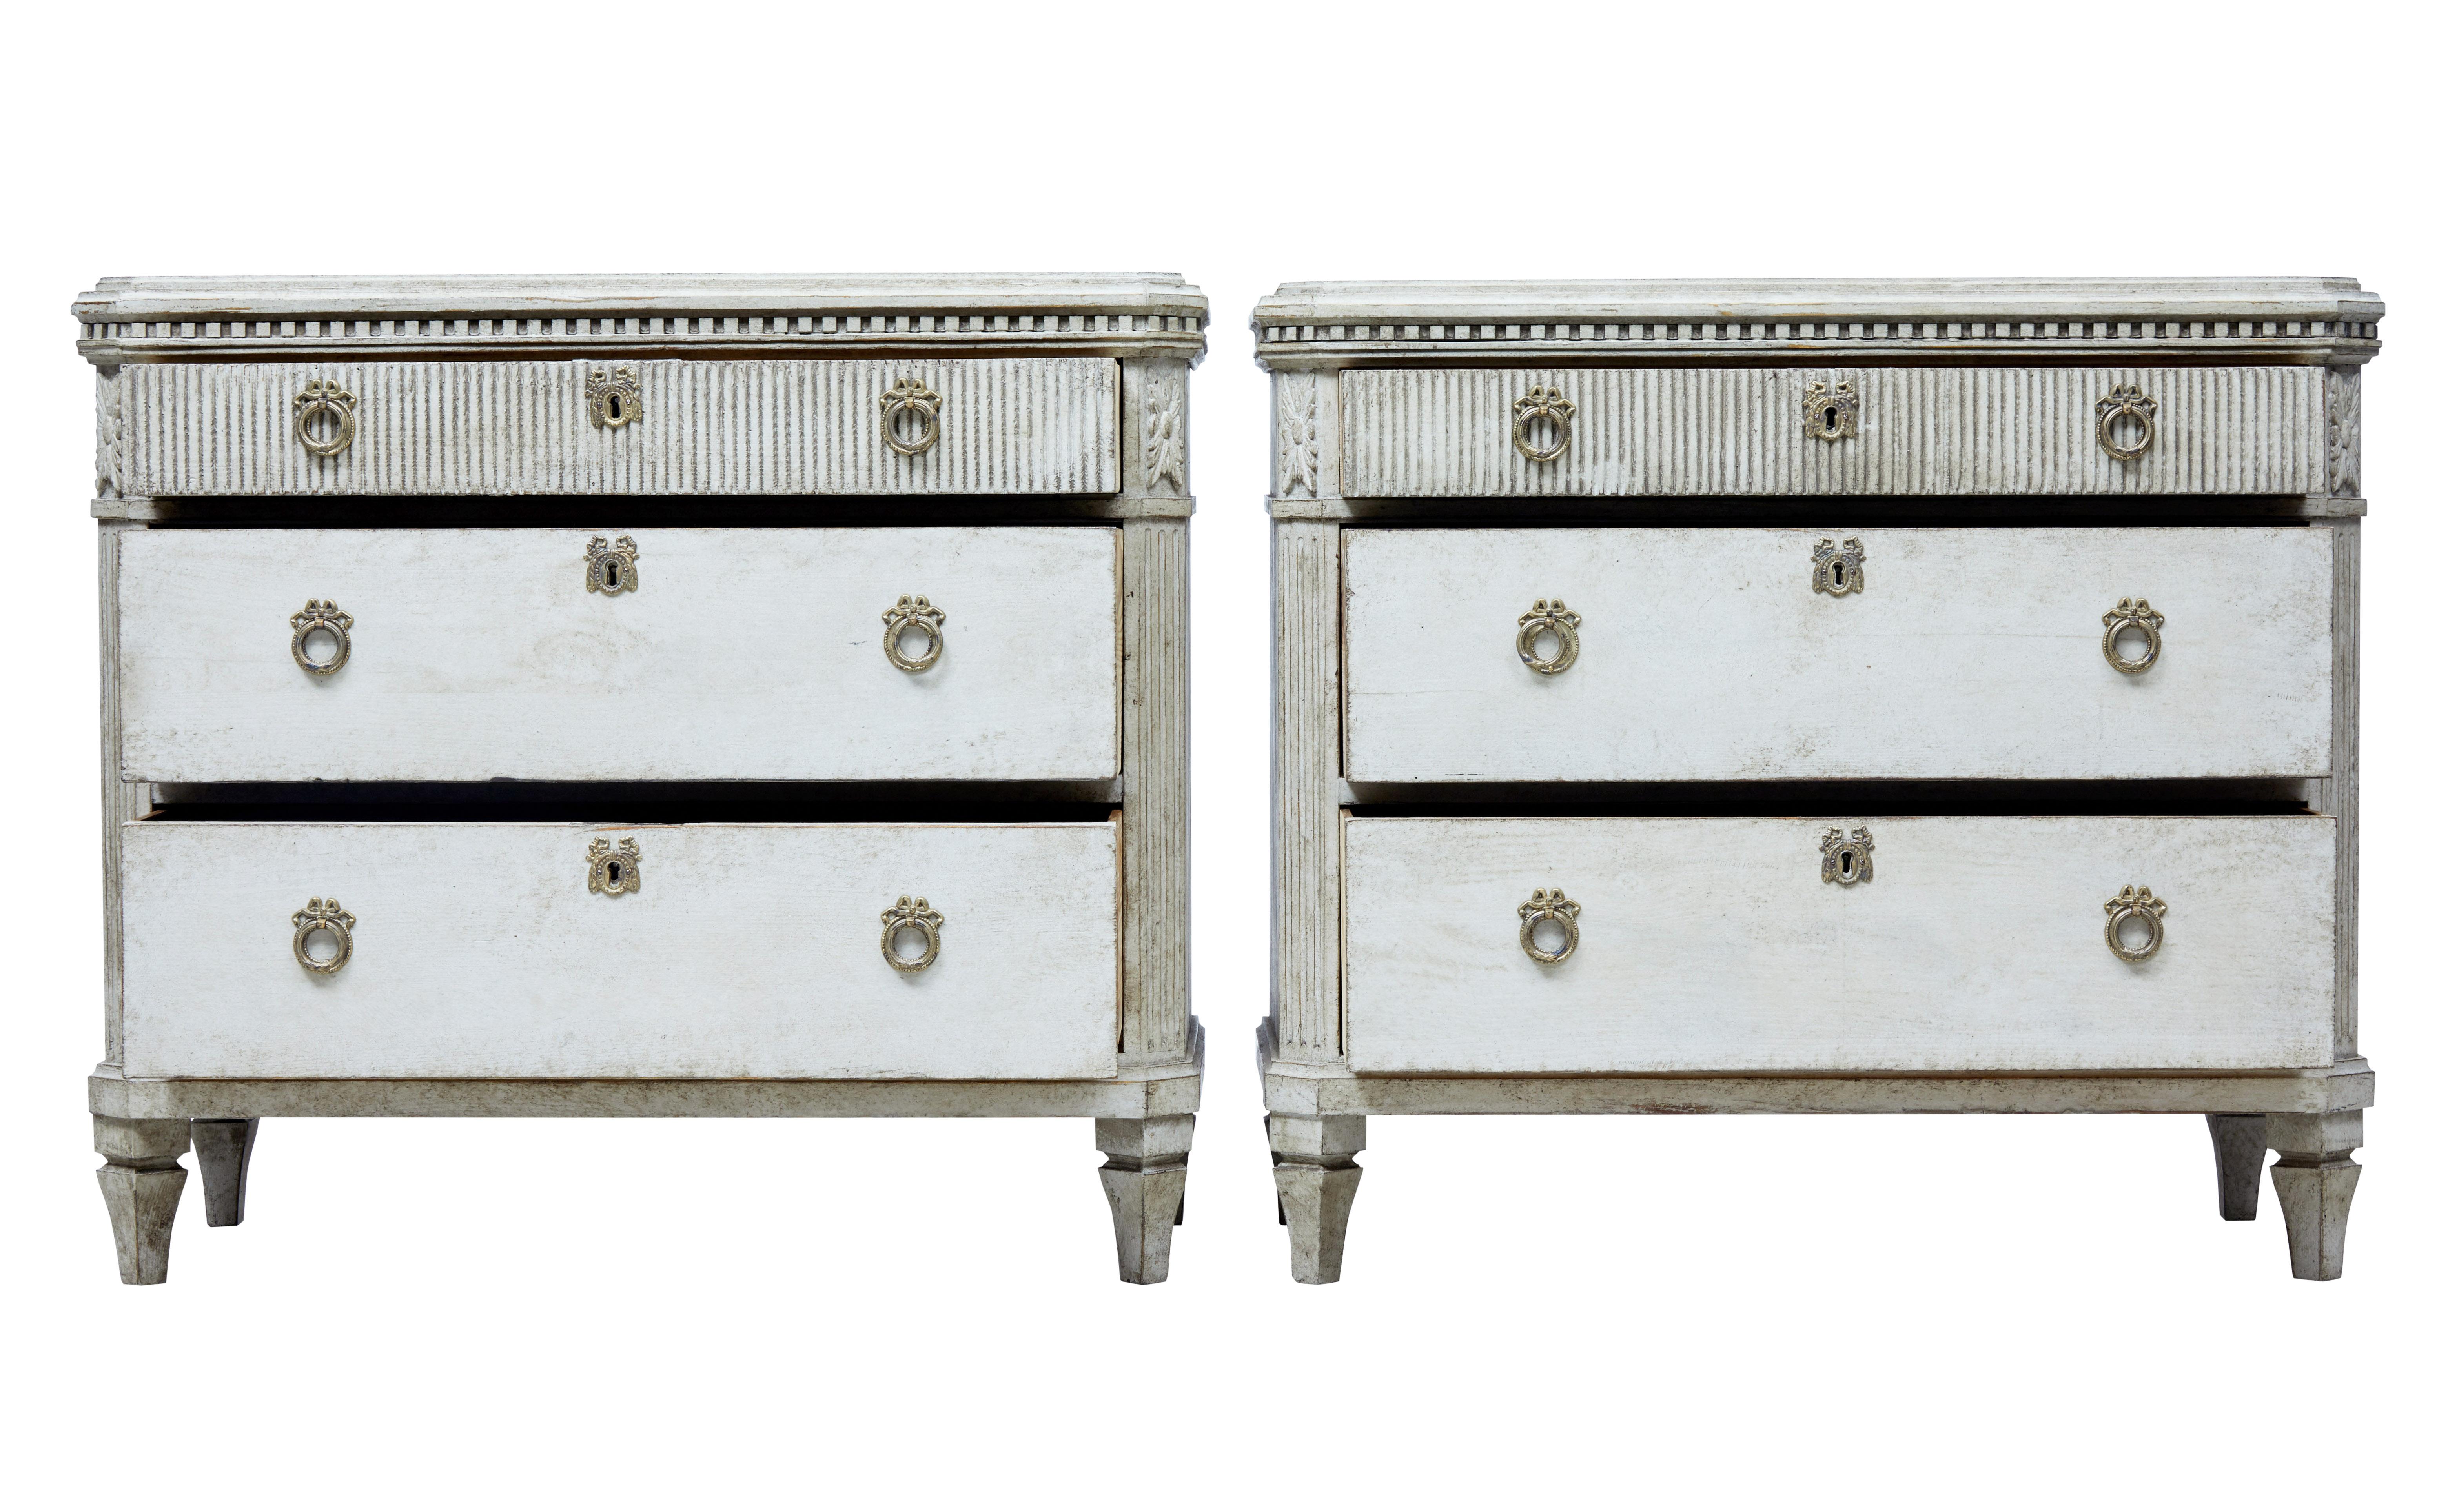 Good quality grey painted chest of drawers, circa 1870.

Stepped top with dentil frieze below. Canted corners with applied carving and fluting. Channeled top drawer detail with a further 2 drawers.

Standing on short tapered feet.

Later paint